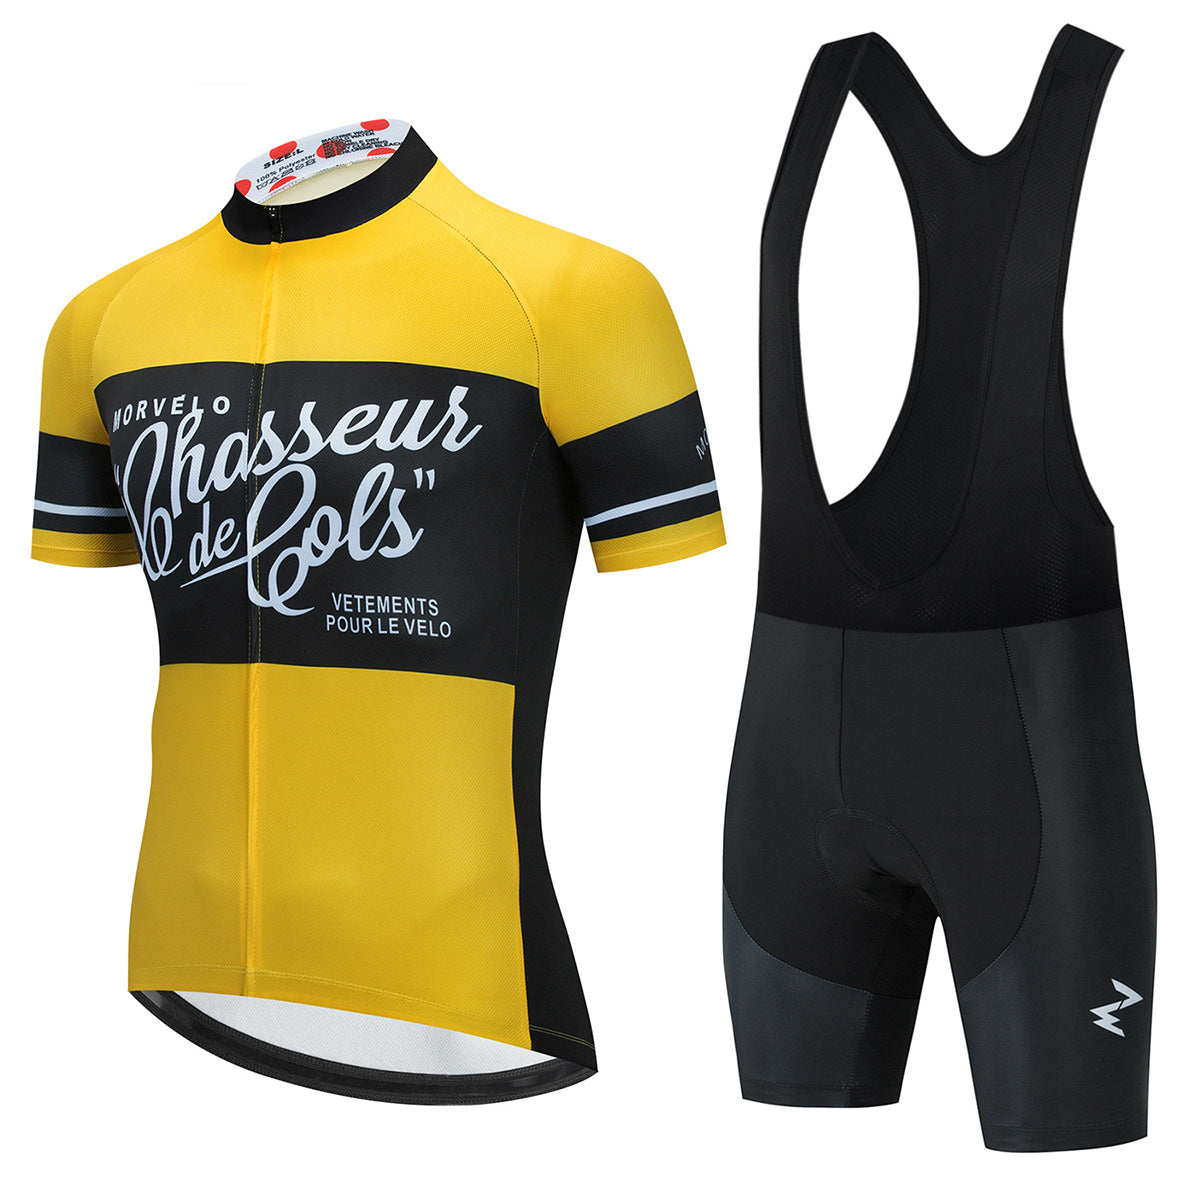 New Summer Short-Sleeved Cycling Jersey Suit Breathable Bicycle Sportswear Uniform Custom Cycling Jersey